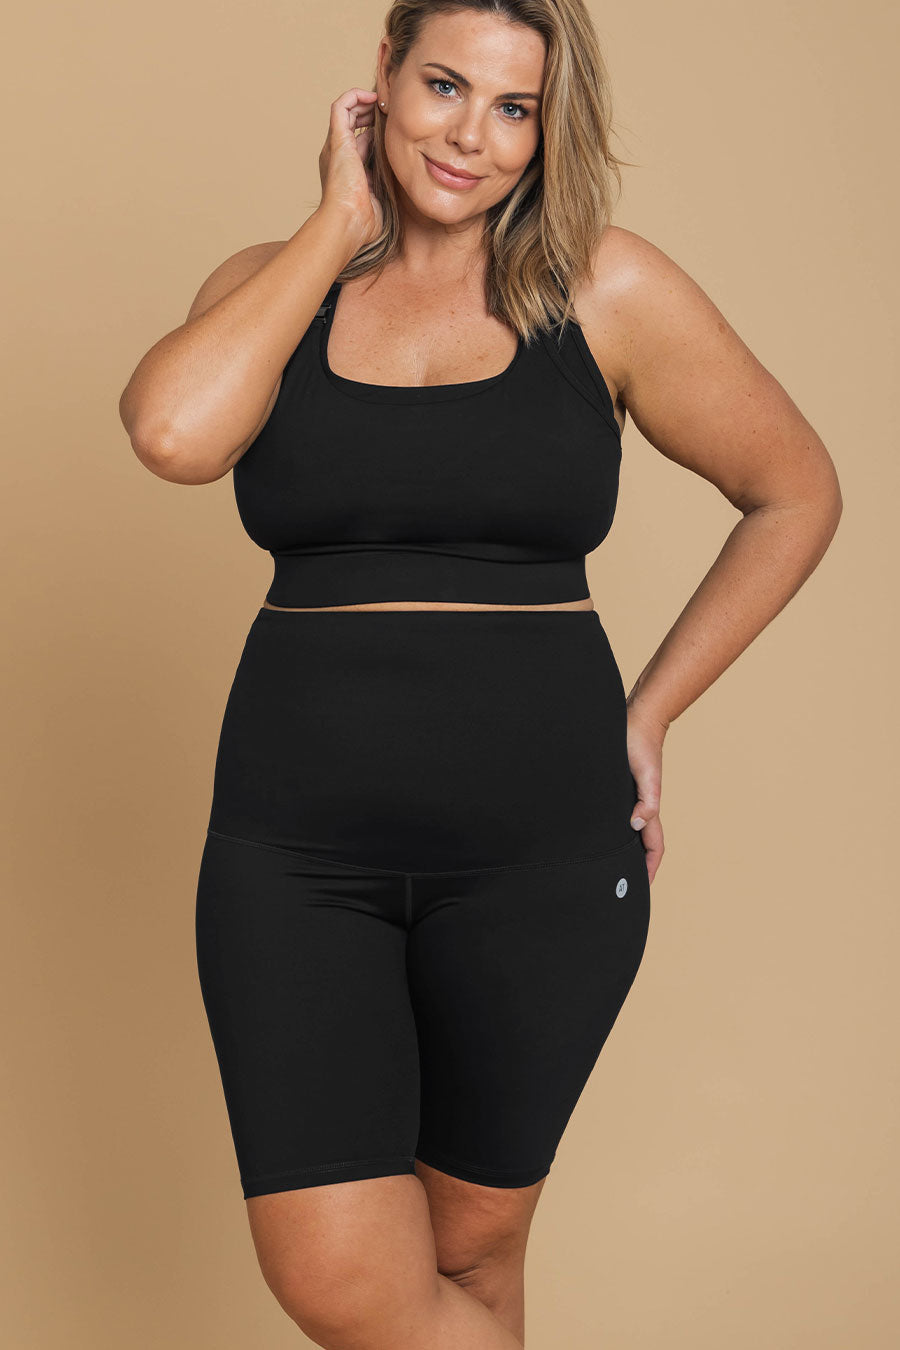 Postnatal Recovery Bike Short - Black from Active Truth™
